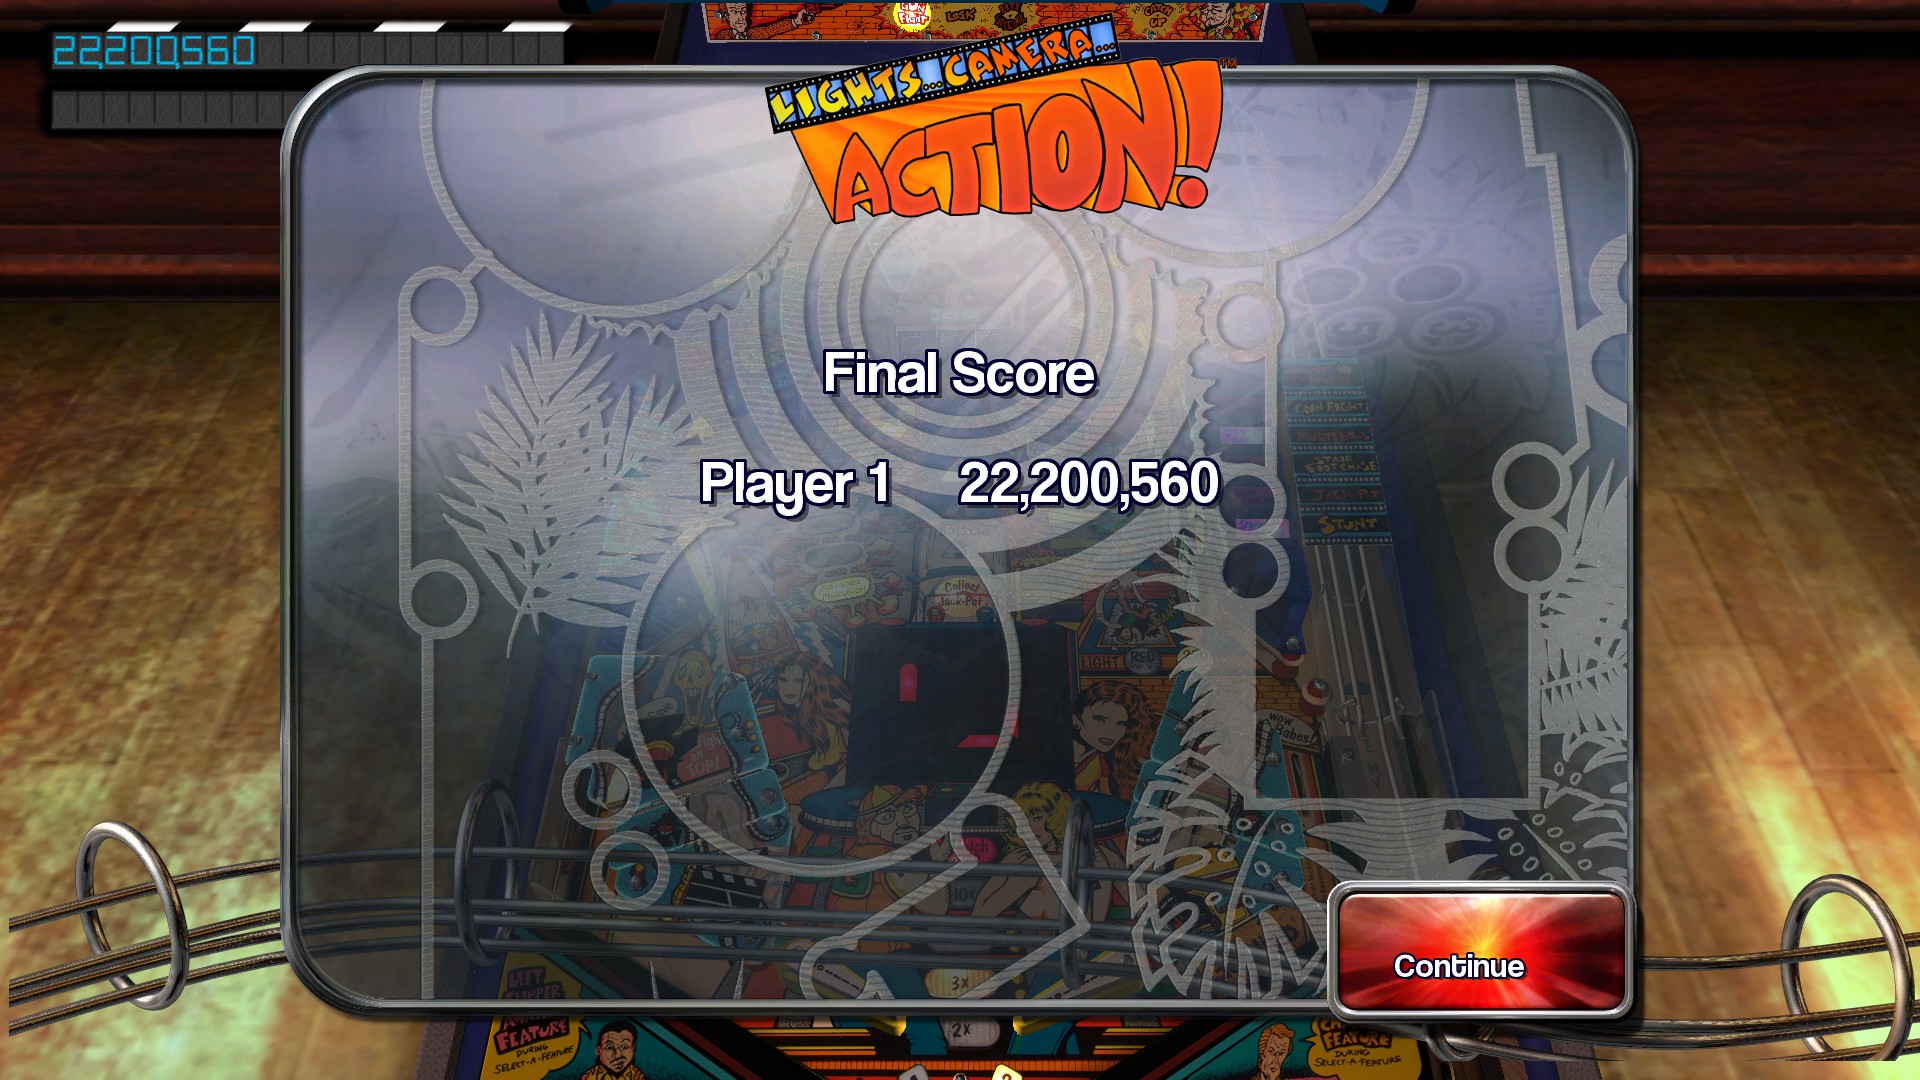 TheTrickster: Pinball Arcade: Lights...Camera...Action! (PC) 22,200,560 points on 2016-03-05 18:24:43